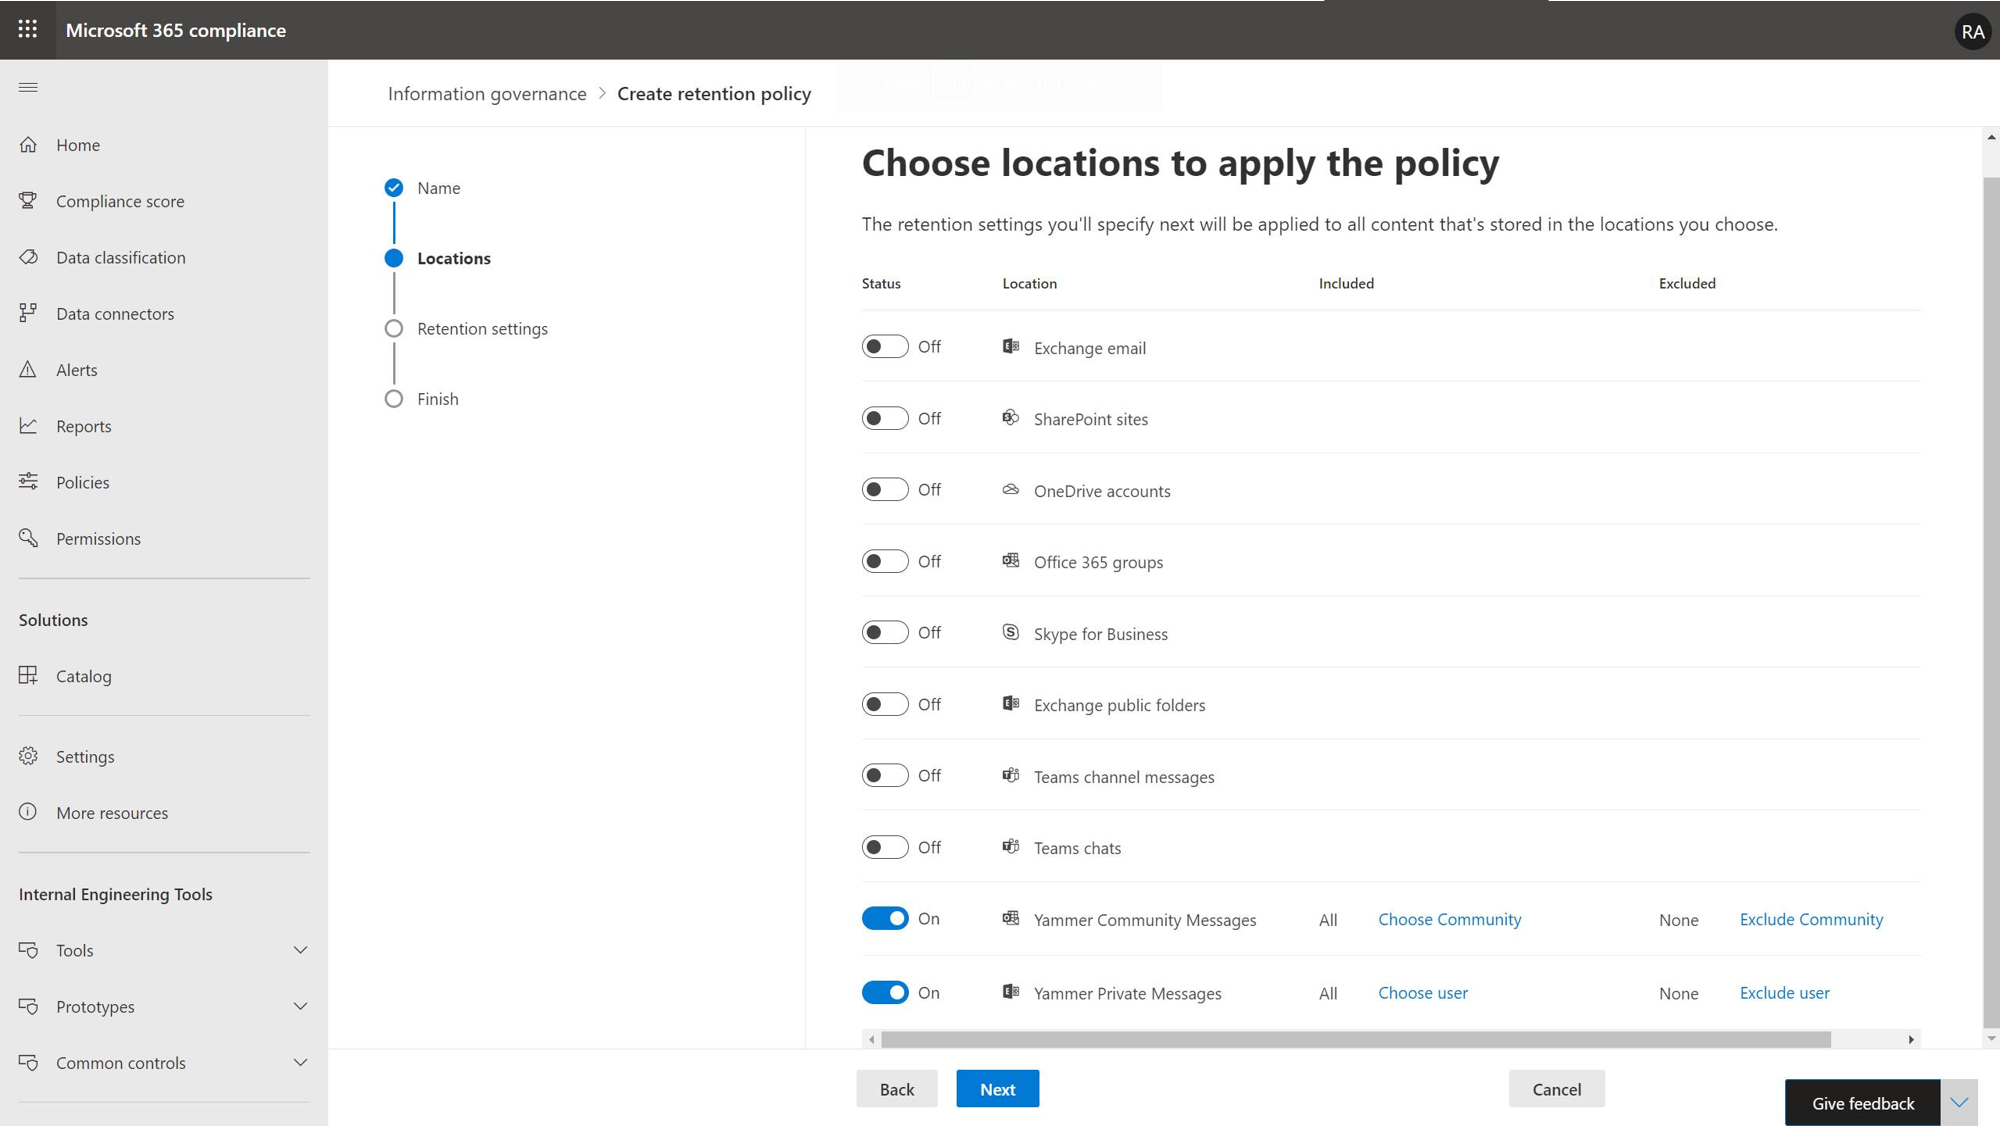 image of retention policy settings by location.